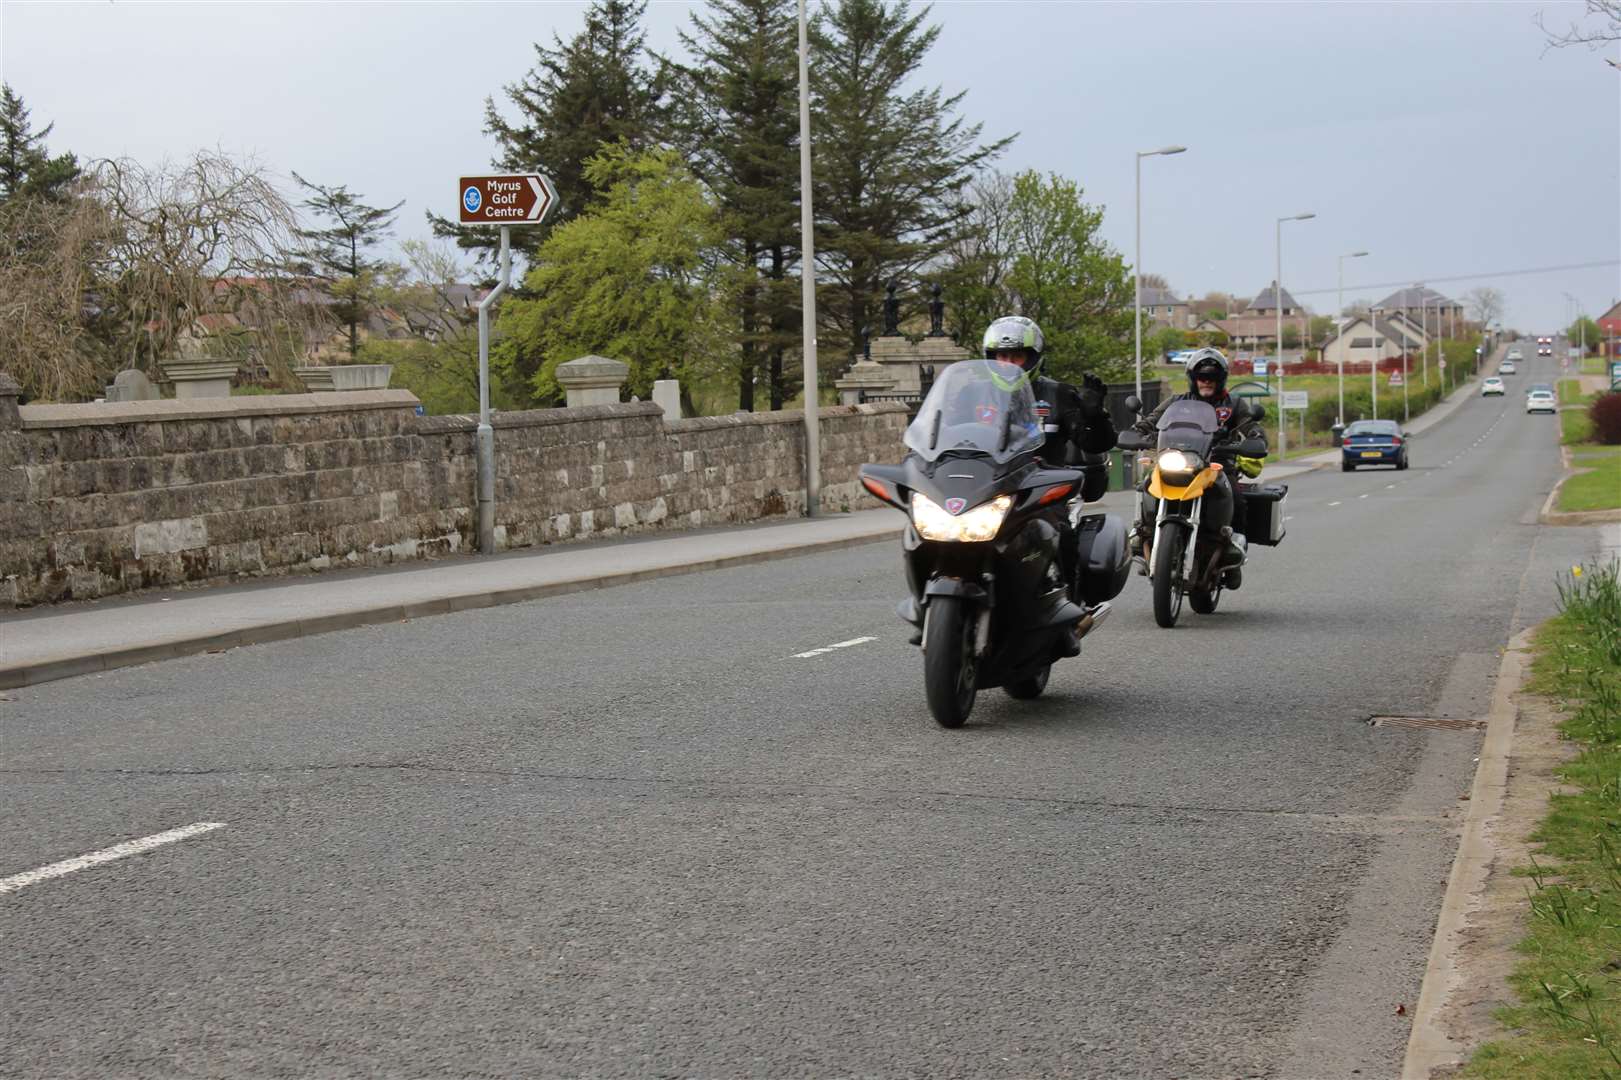 The group is touring the UK on their motorcycles paying their respects at the graves of those who fell in the Falklands War.